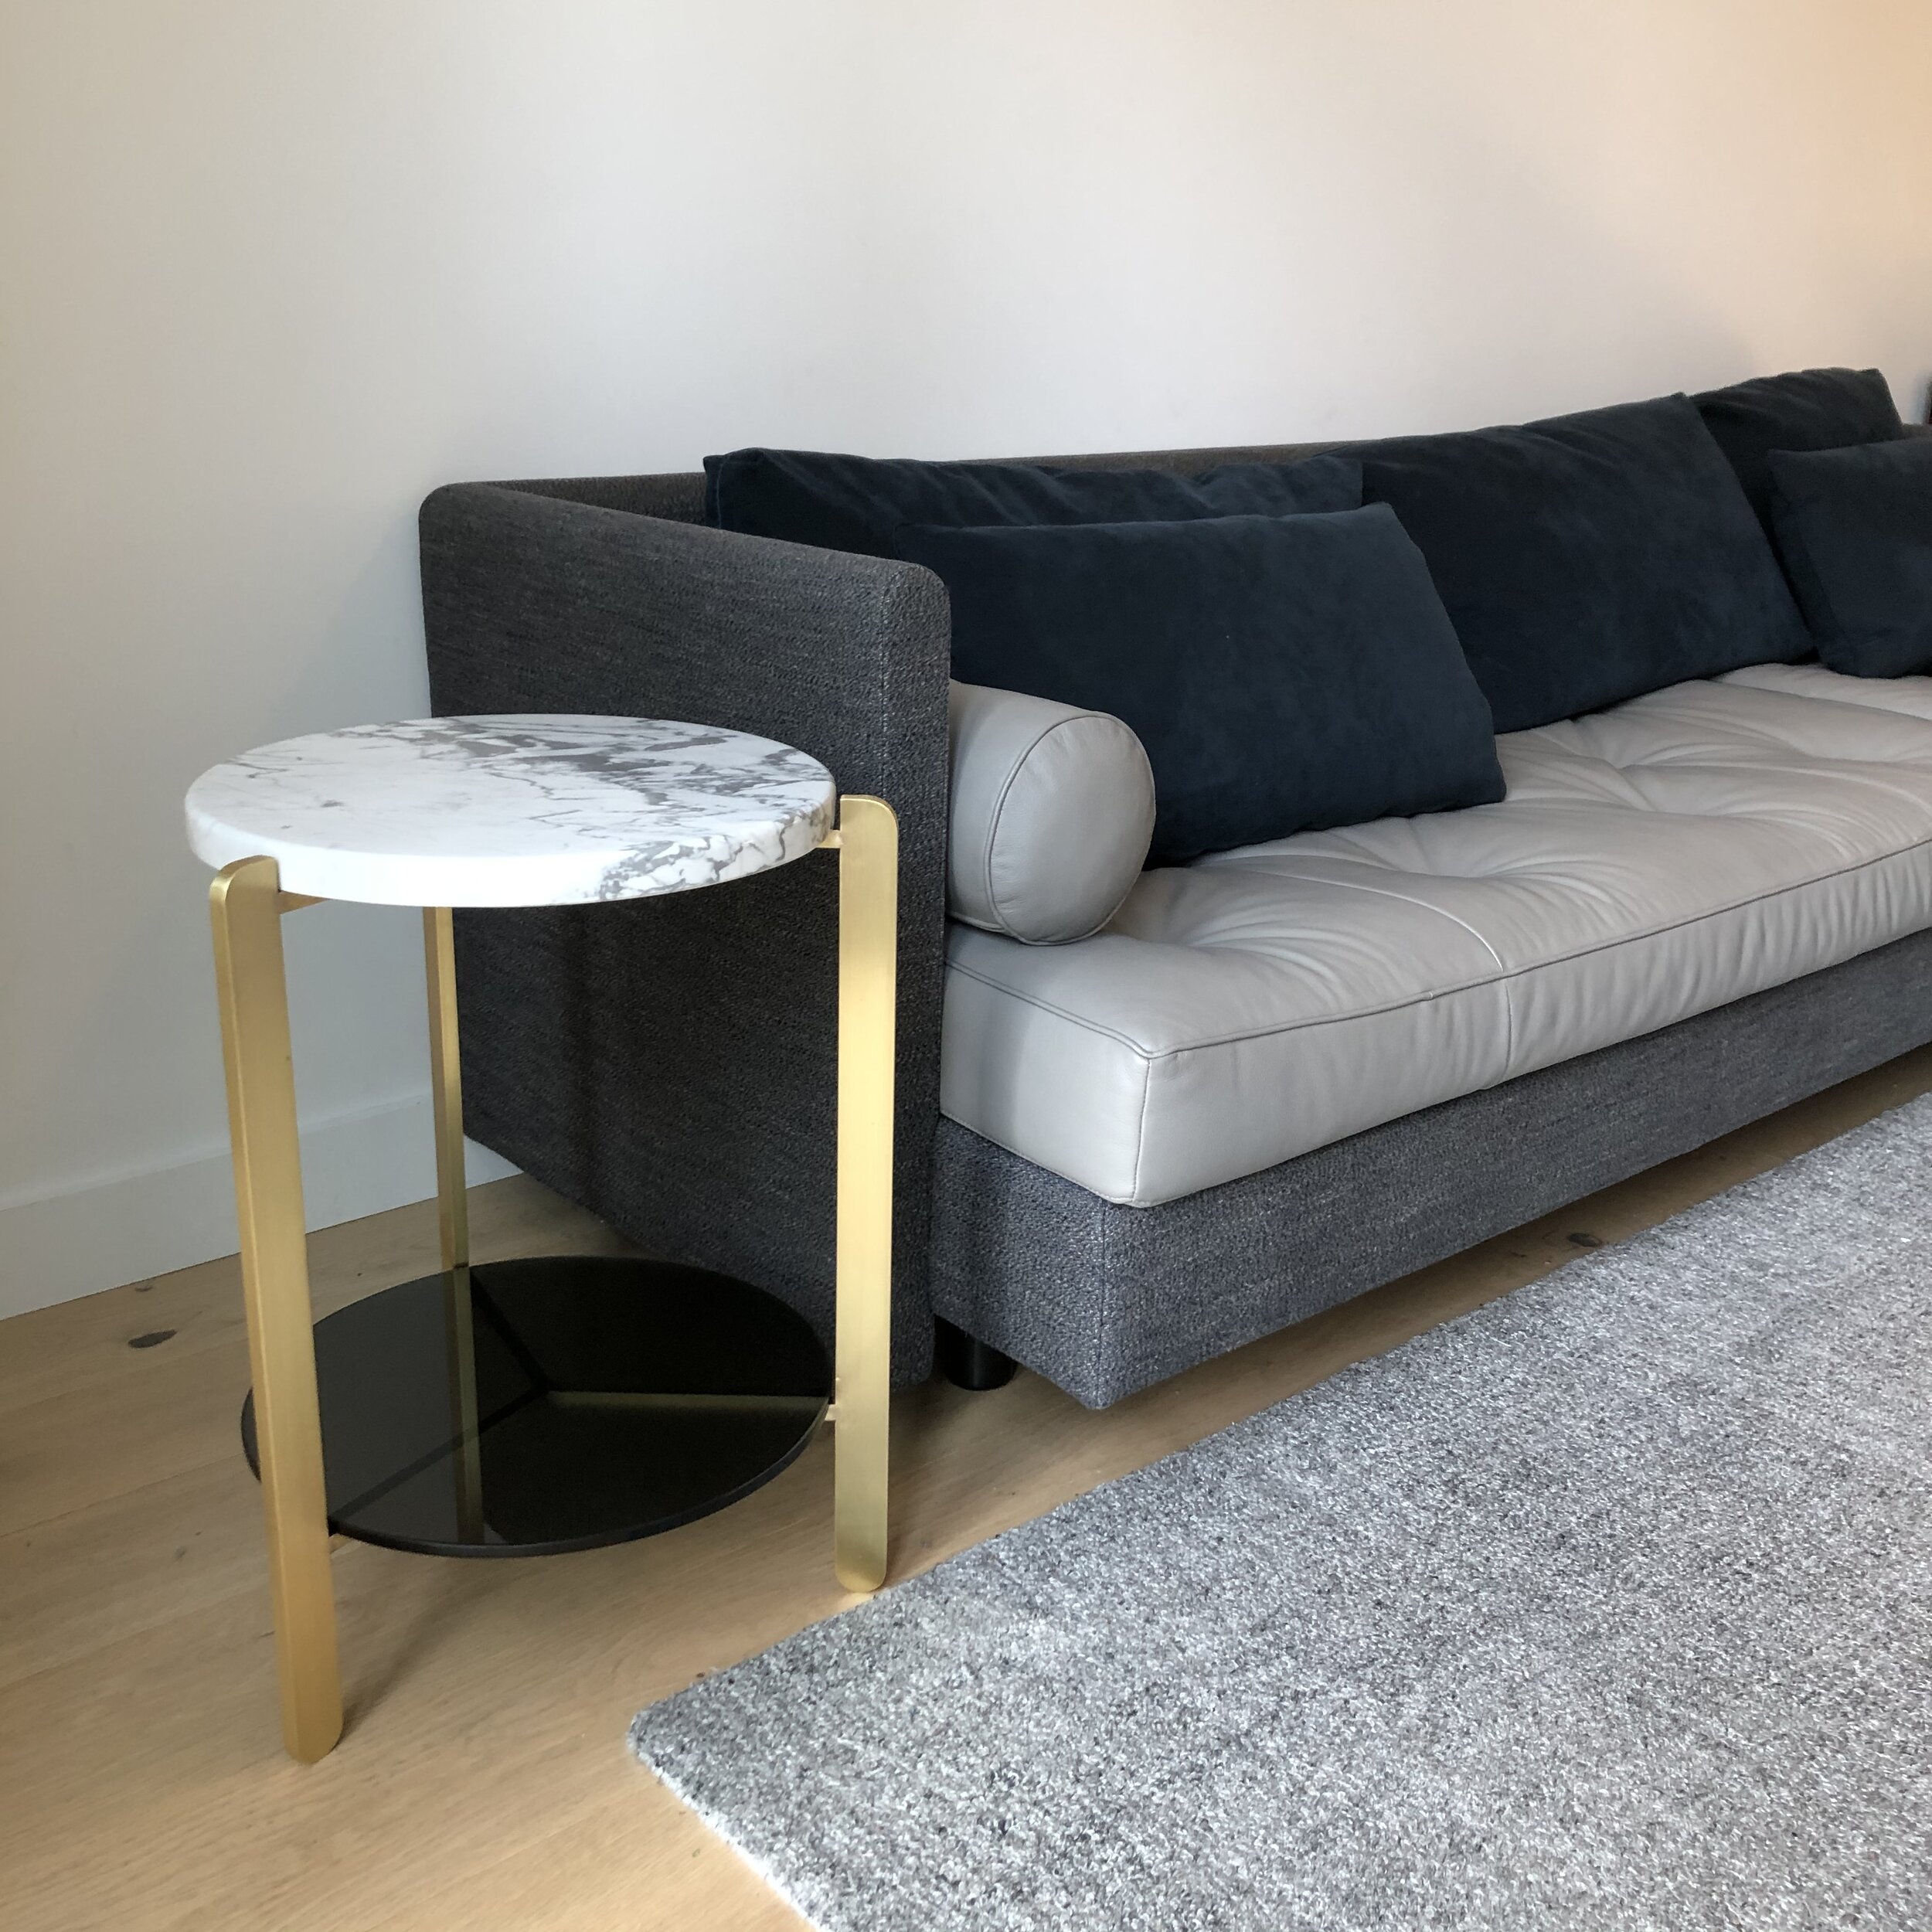  Client Sofa / Side Table Moment with “Ternary” Side Table in Brass, Marble, Grey Glass   (Download Tear Sheet)  